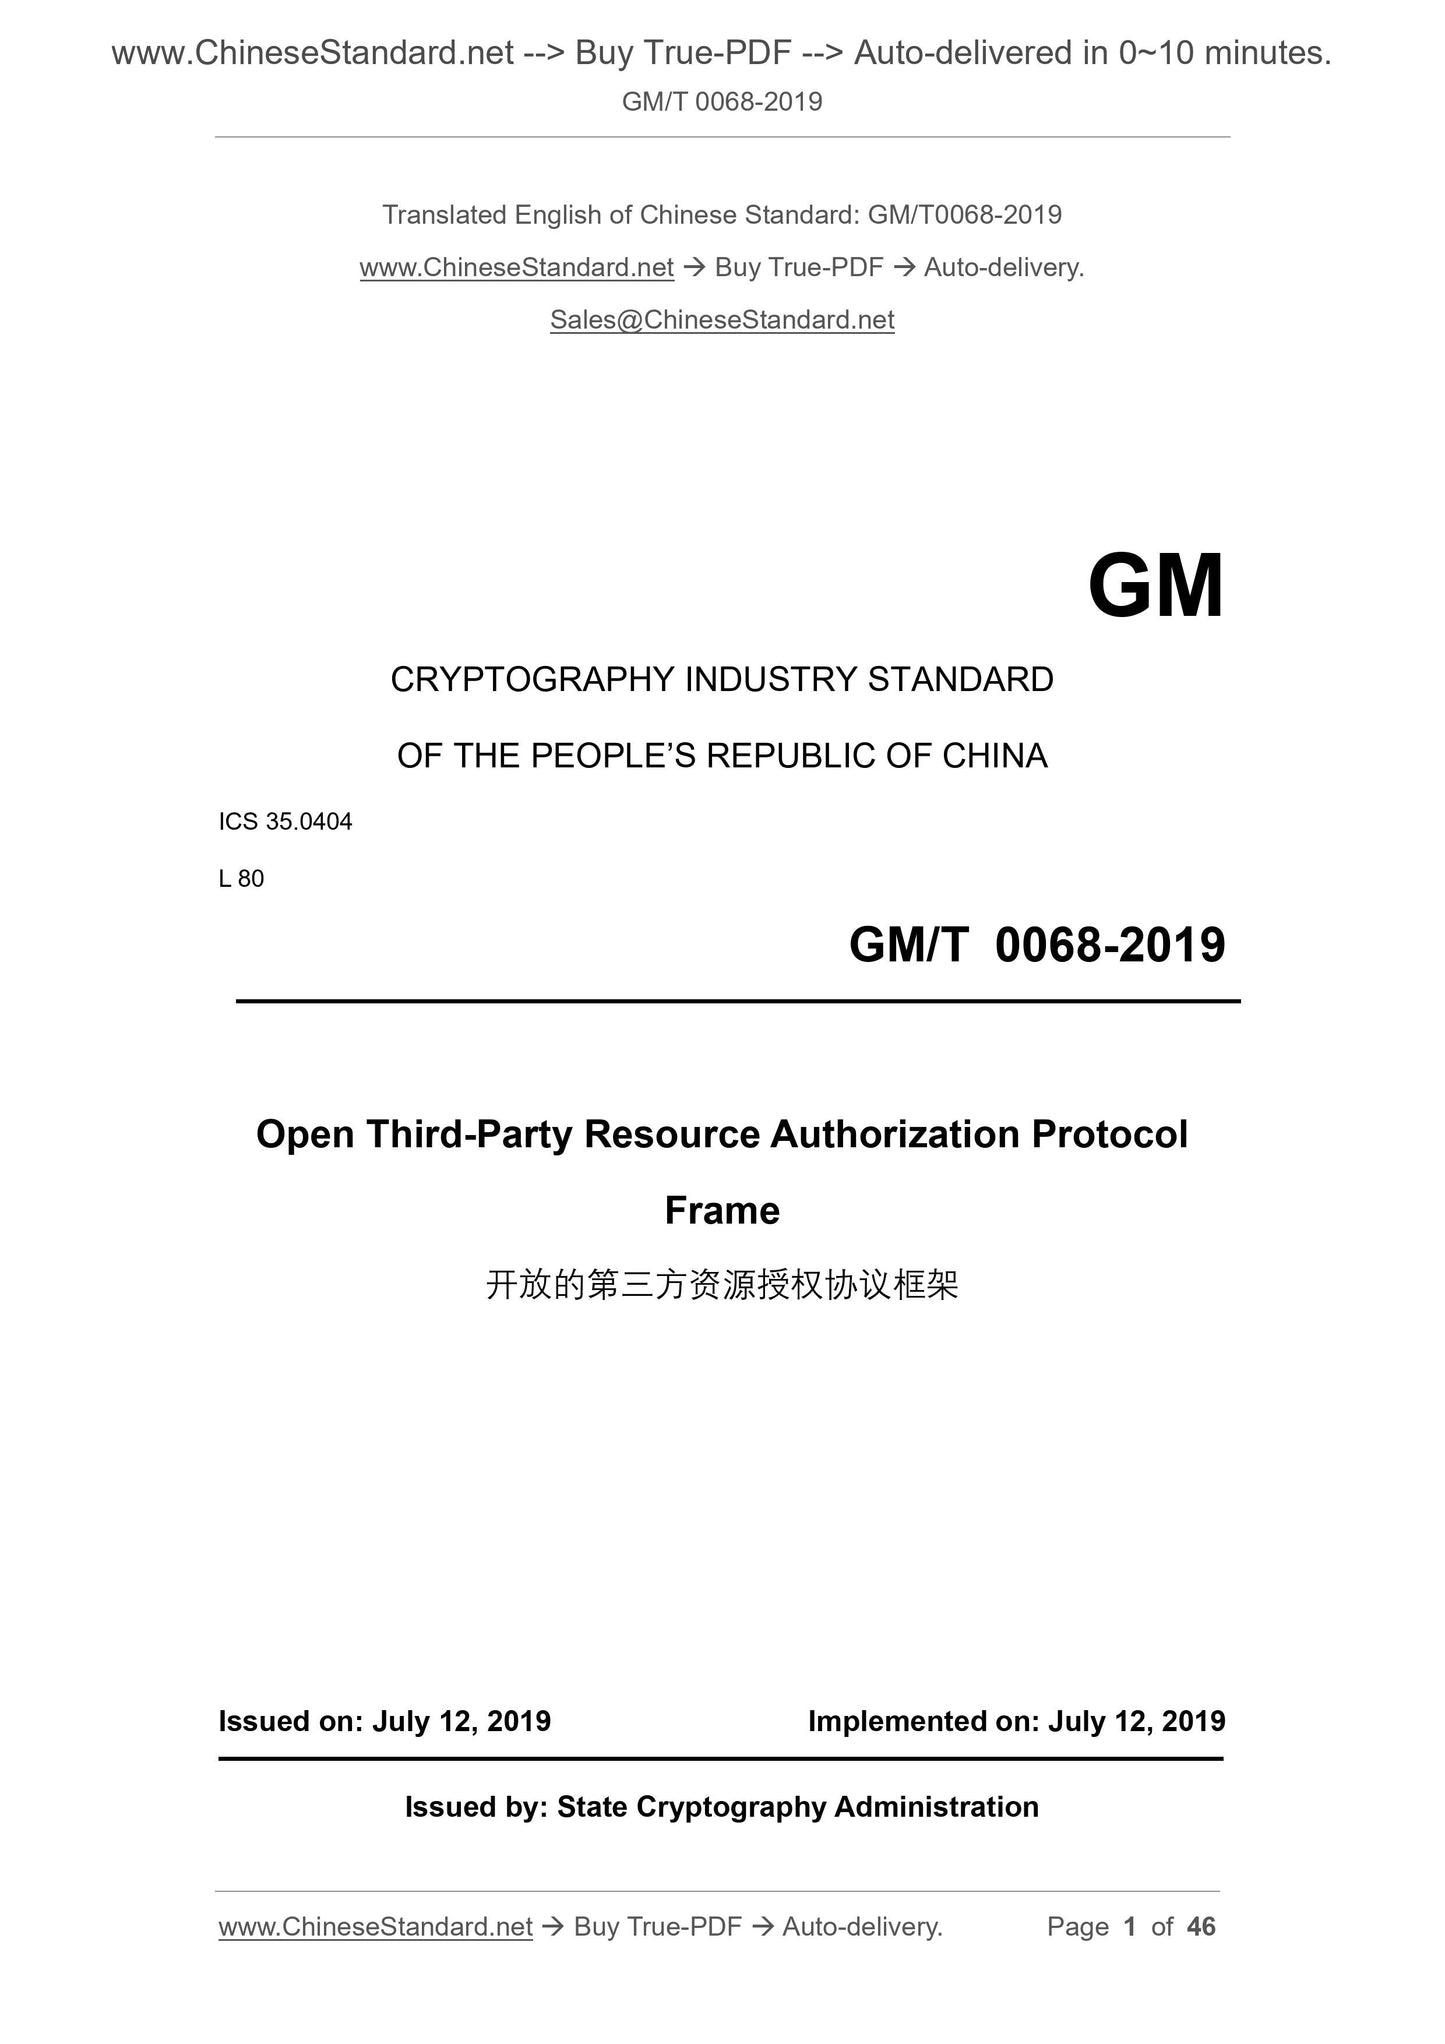 GM/T 0068-2019 Page 1